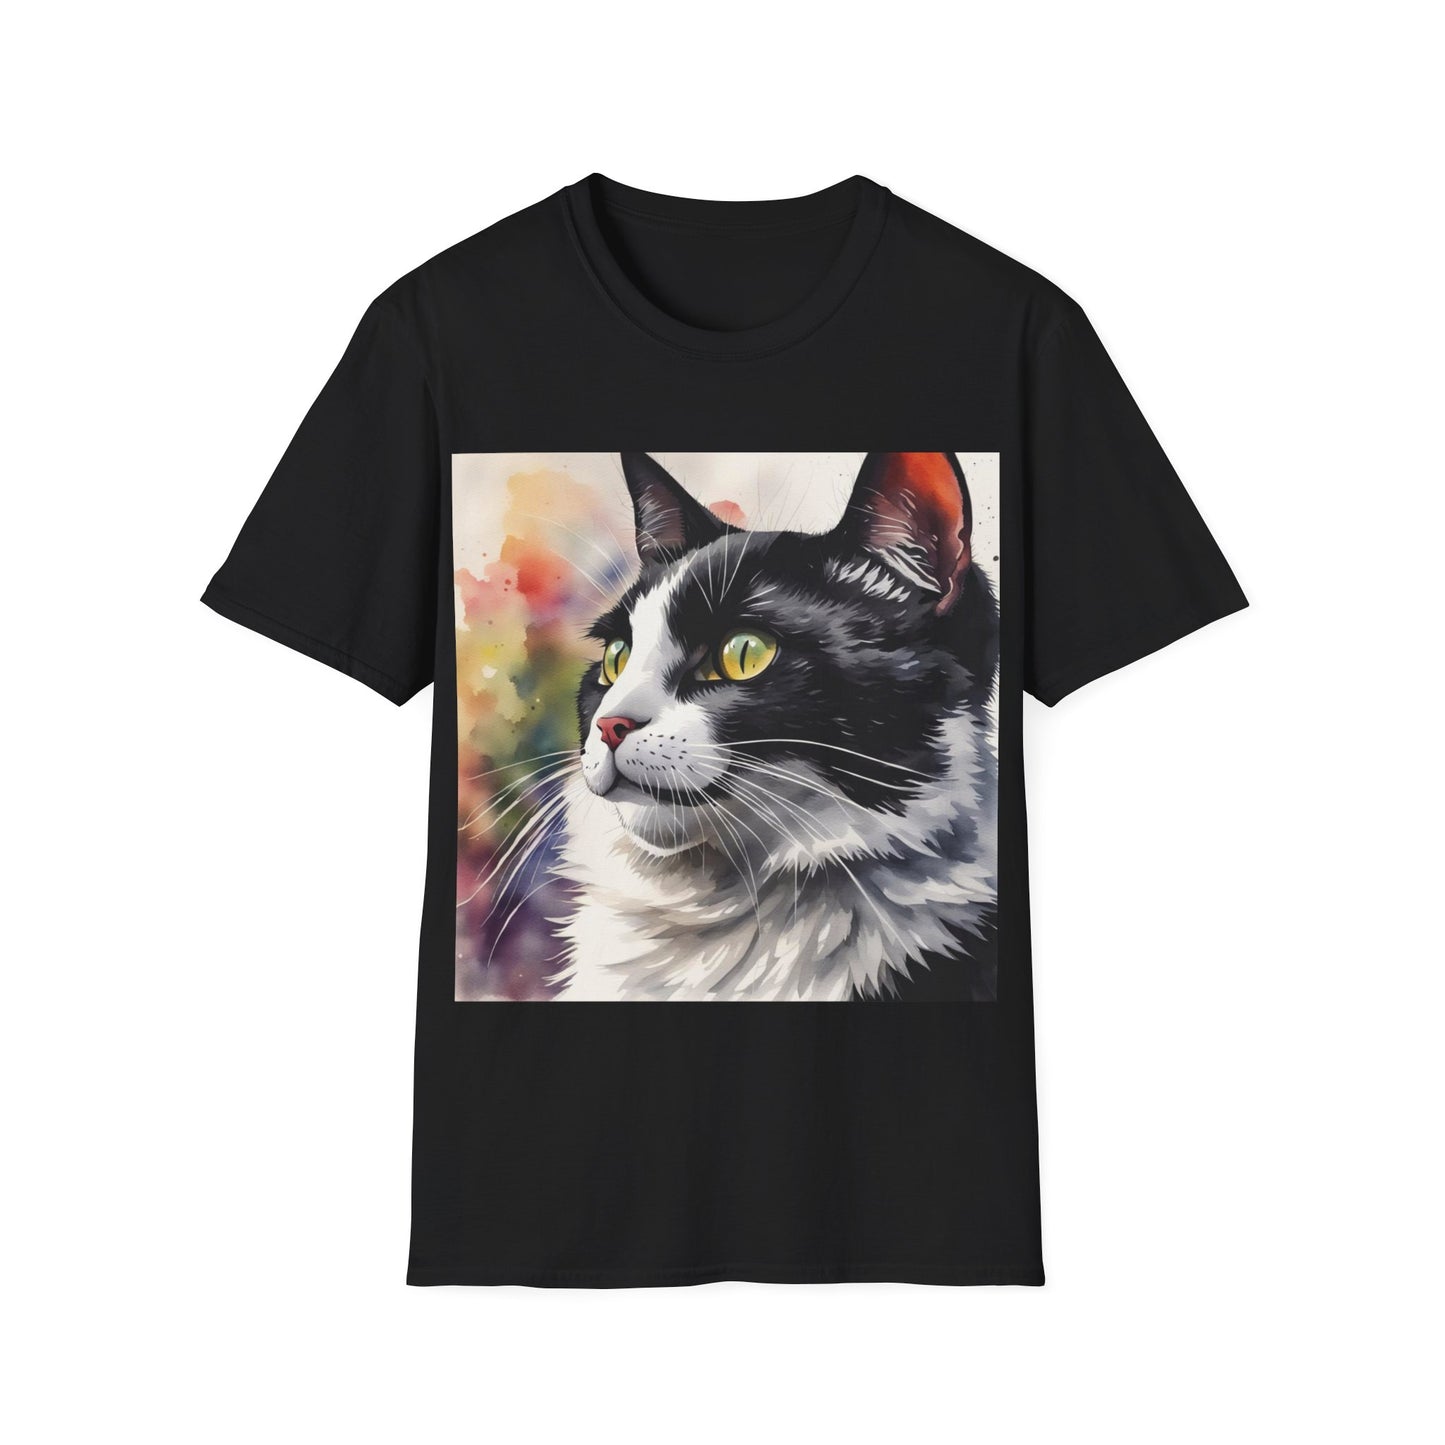 A black t-shirt with a design of a black and white cat painted in watercolours.